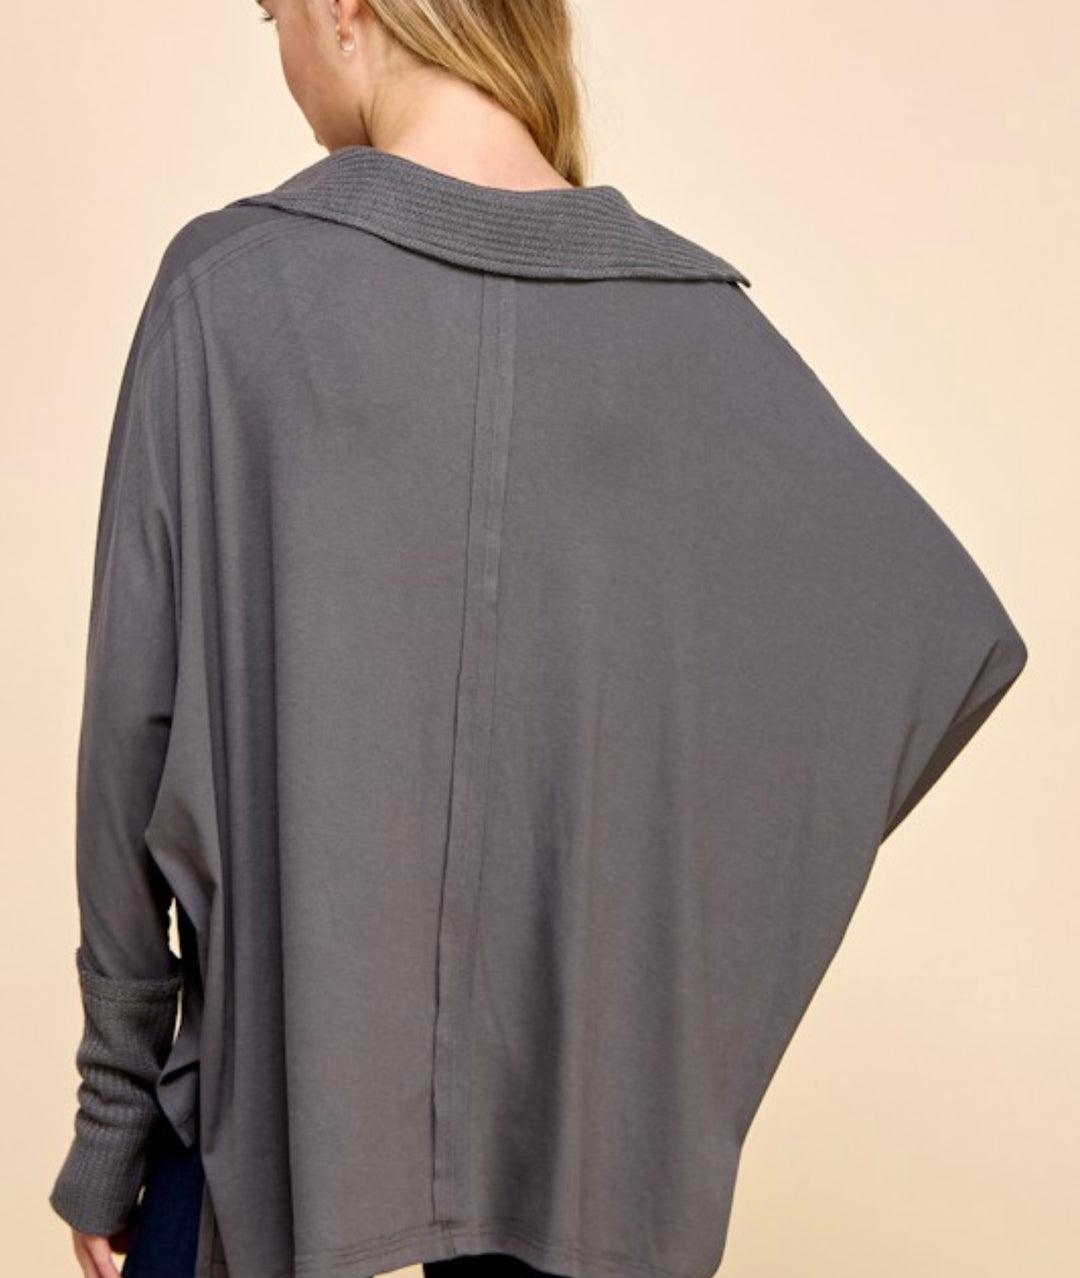 Soft Mixed Texture collared Knit Top in Charcoal